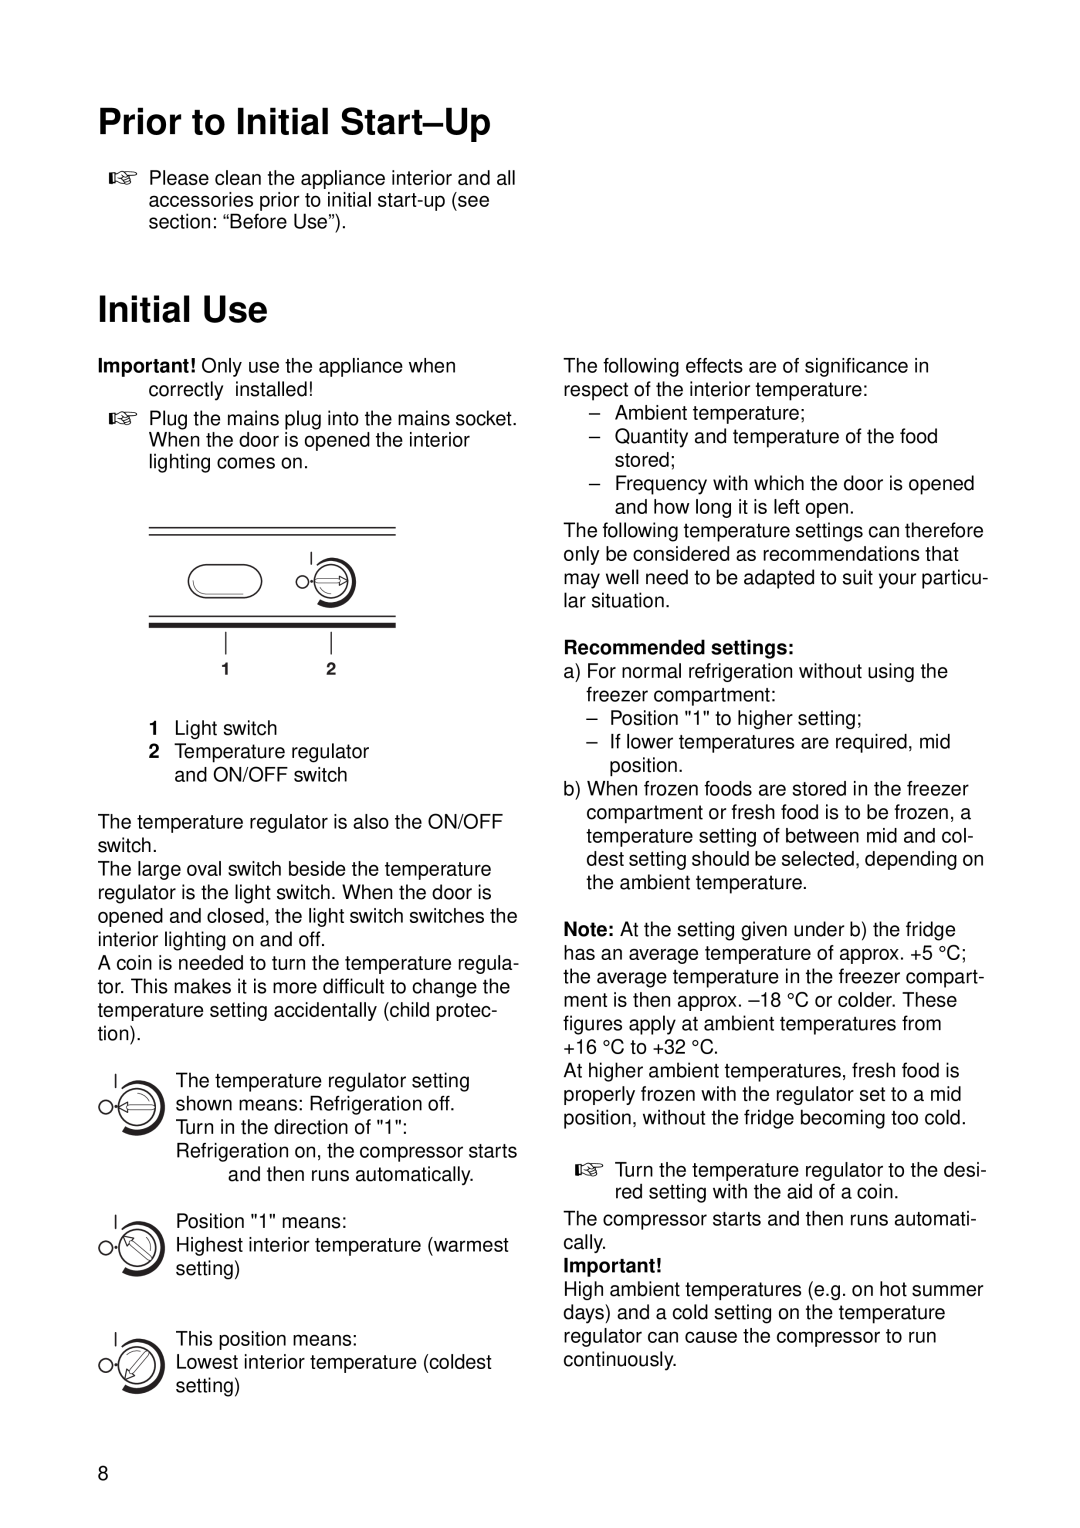 Zanussi ZU 8124 manual Prior to Initial Start-Up, Initial Use, Recommended settings 